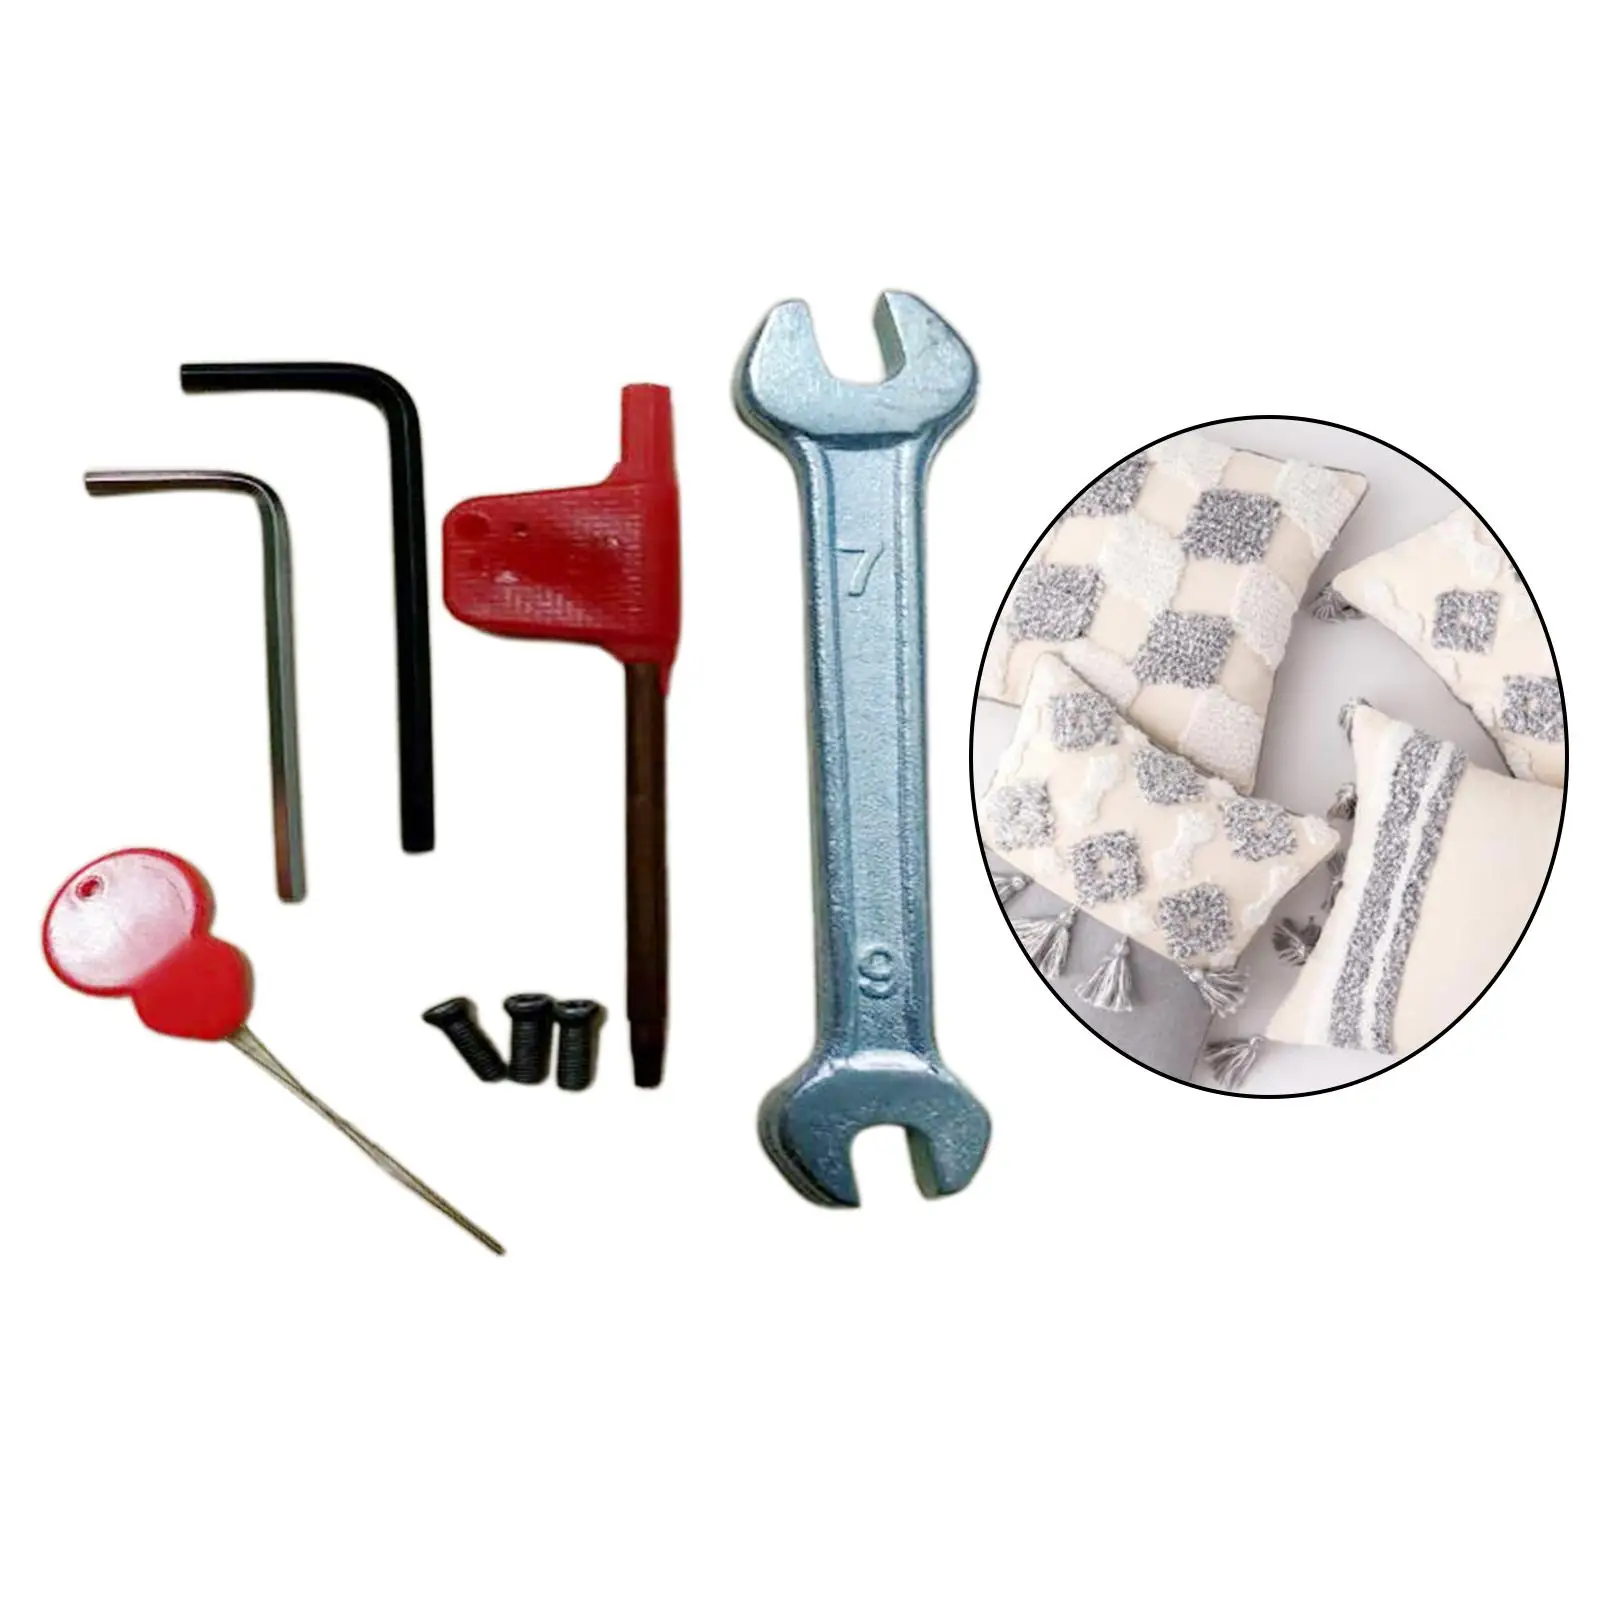 Durable   Tool Set Home Rugs Embroidery Knitting Making Craft DIY Supplies Replacement Accessories